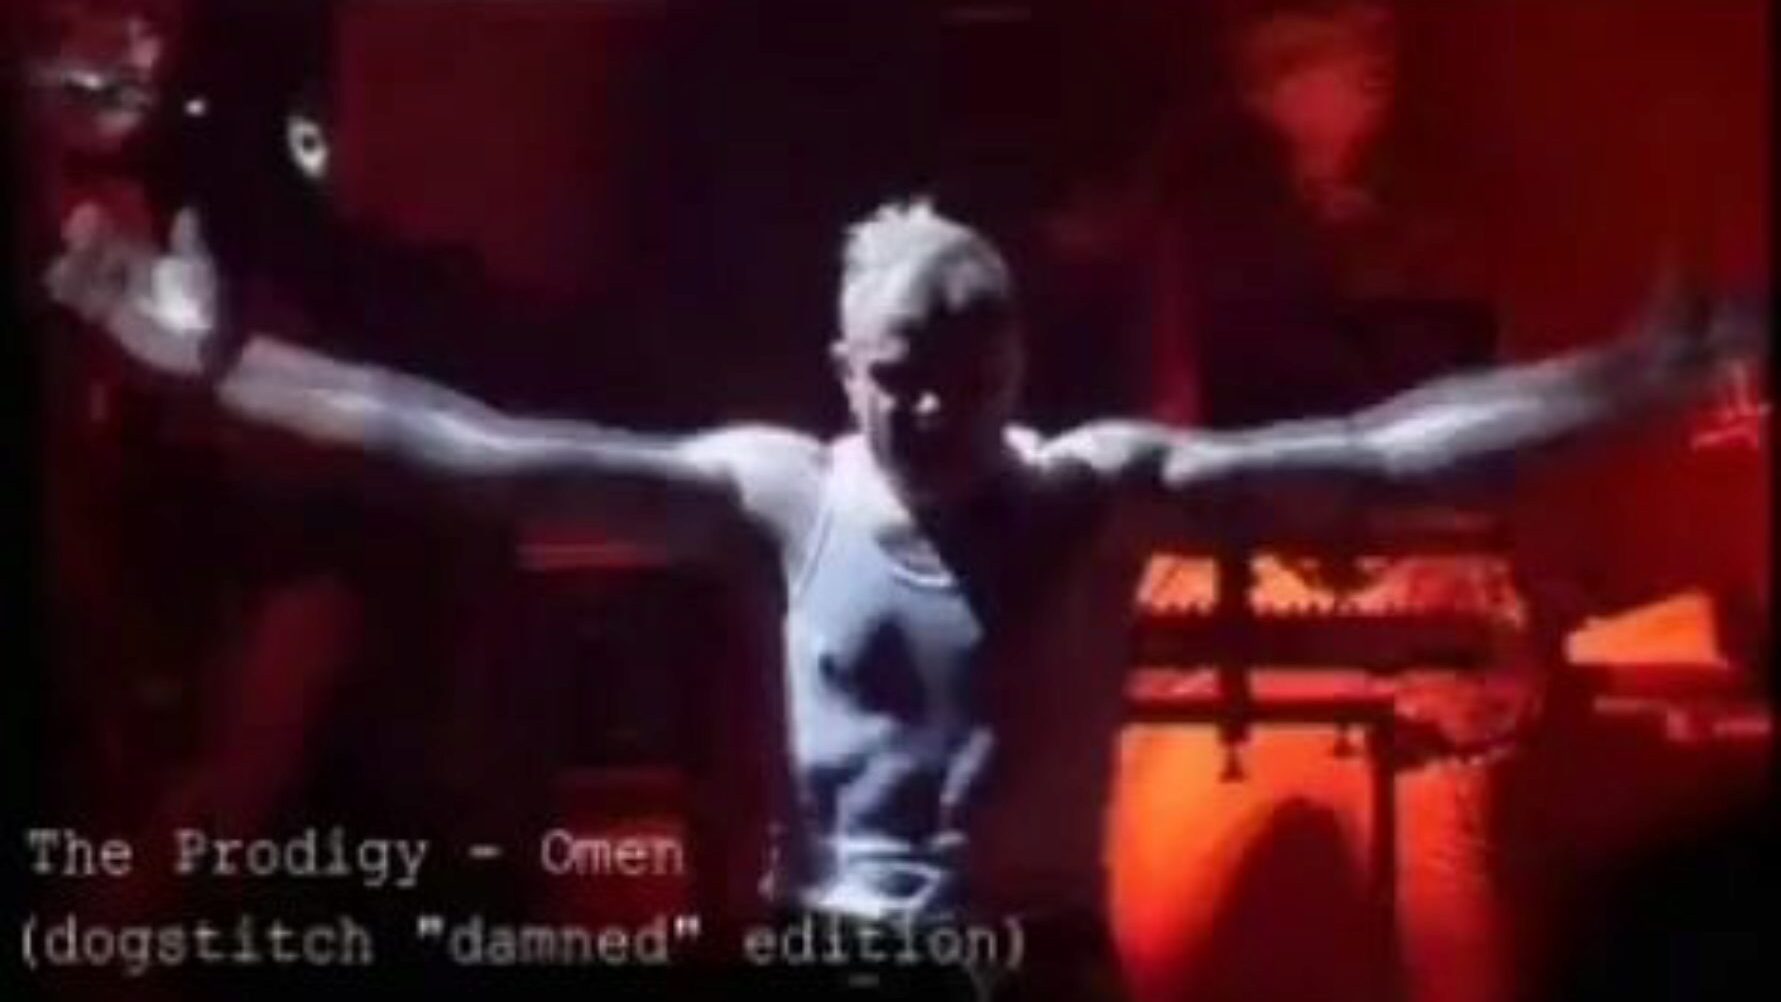 The Prodigy - Omen (dogstitch damned edition)